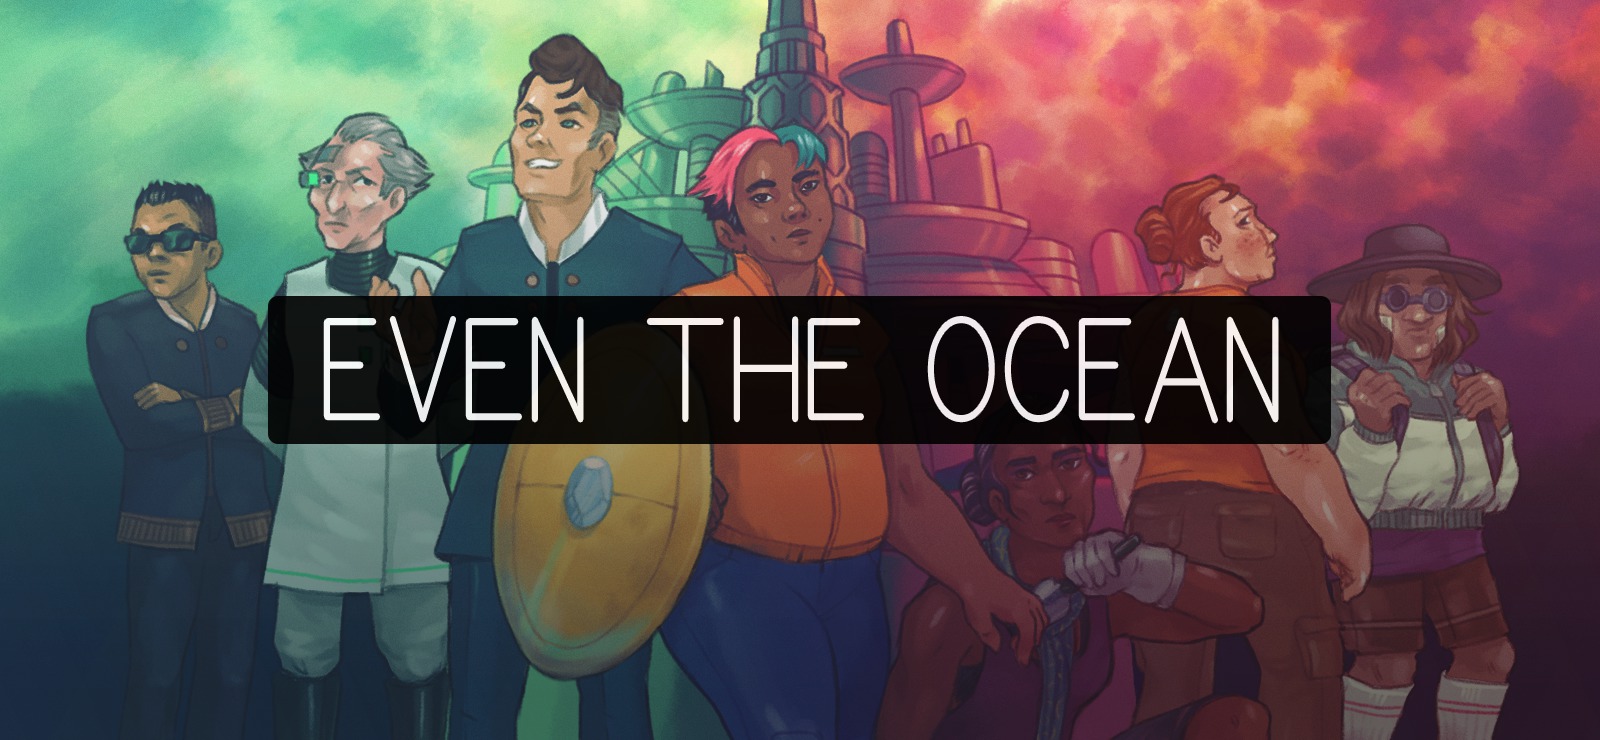 Even The Ocean Free Download Full Version Cracked PC Game